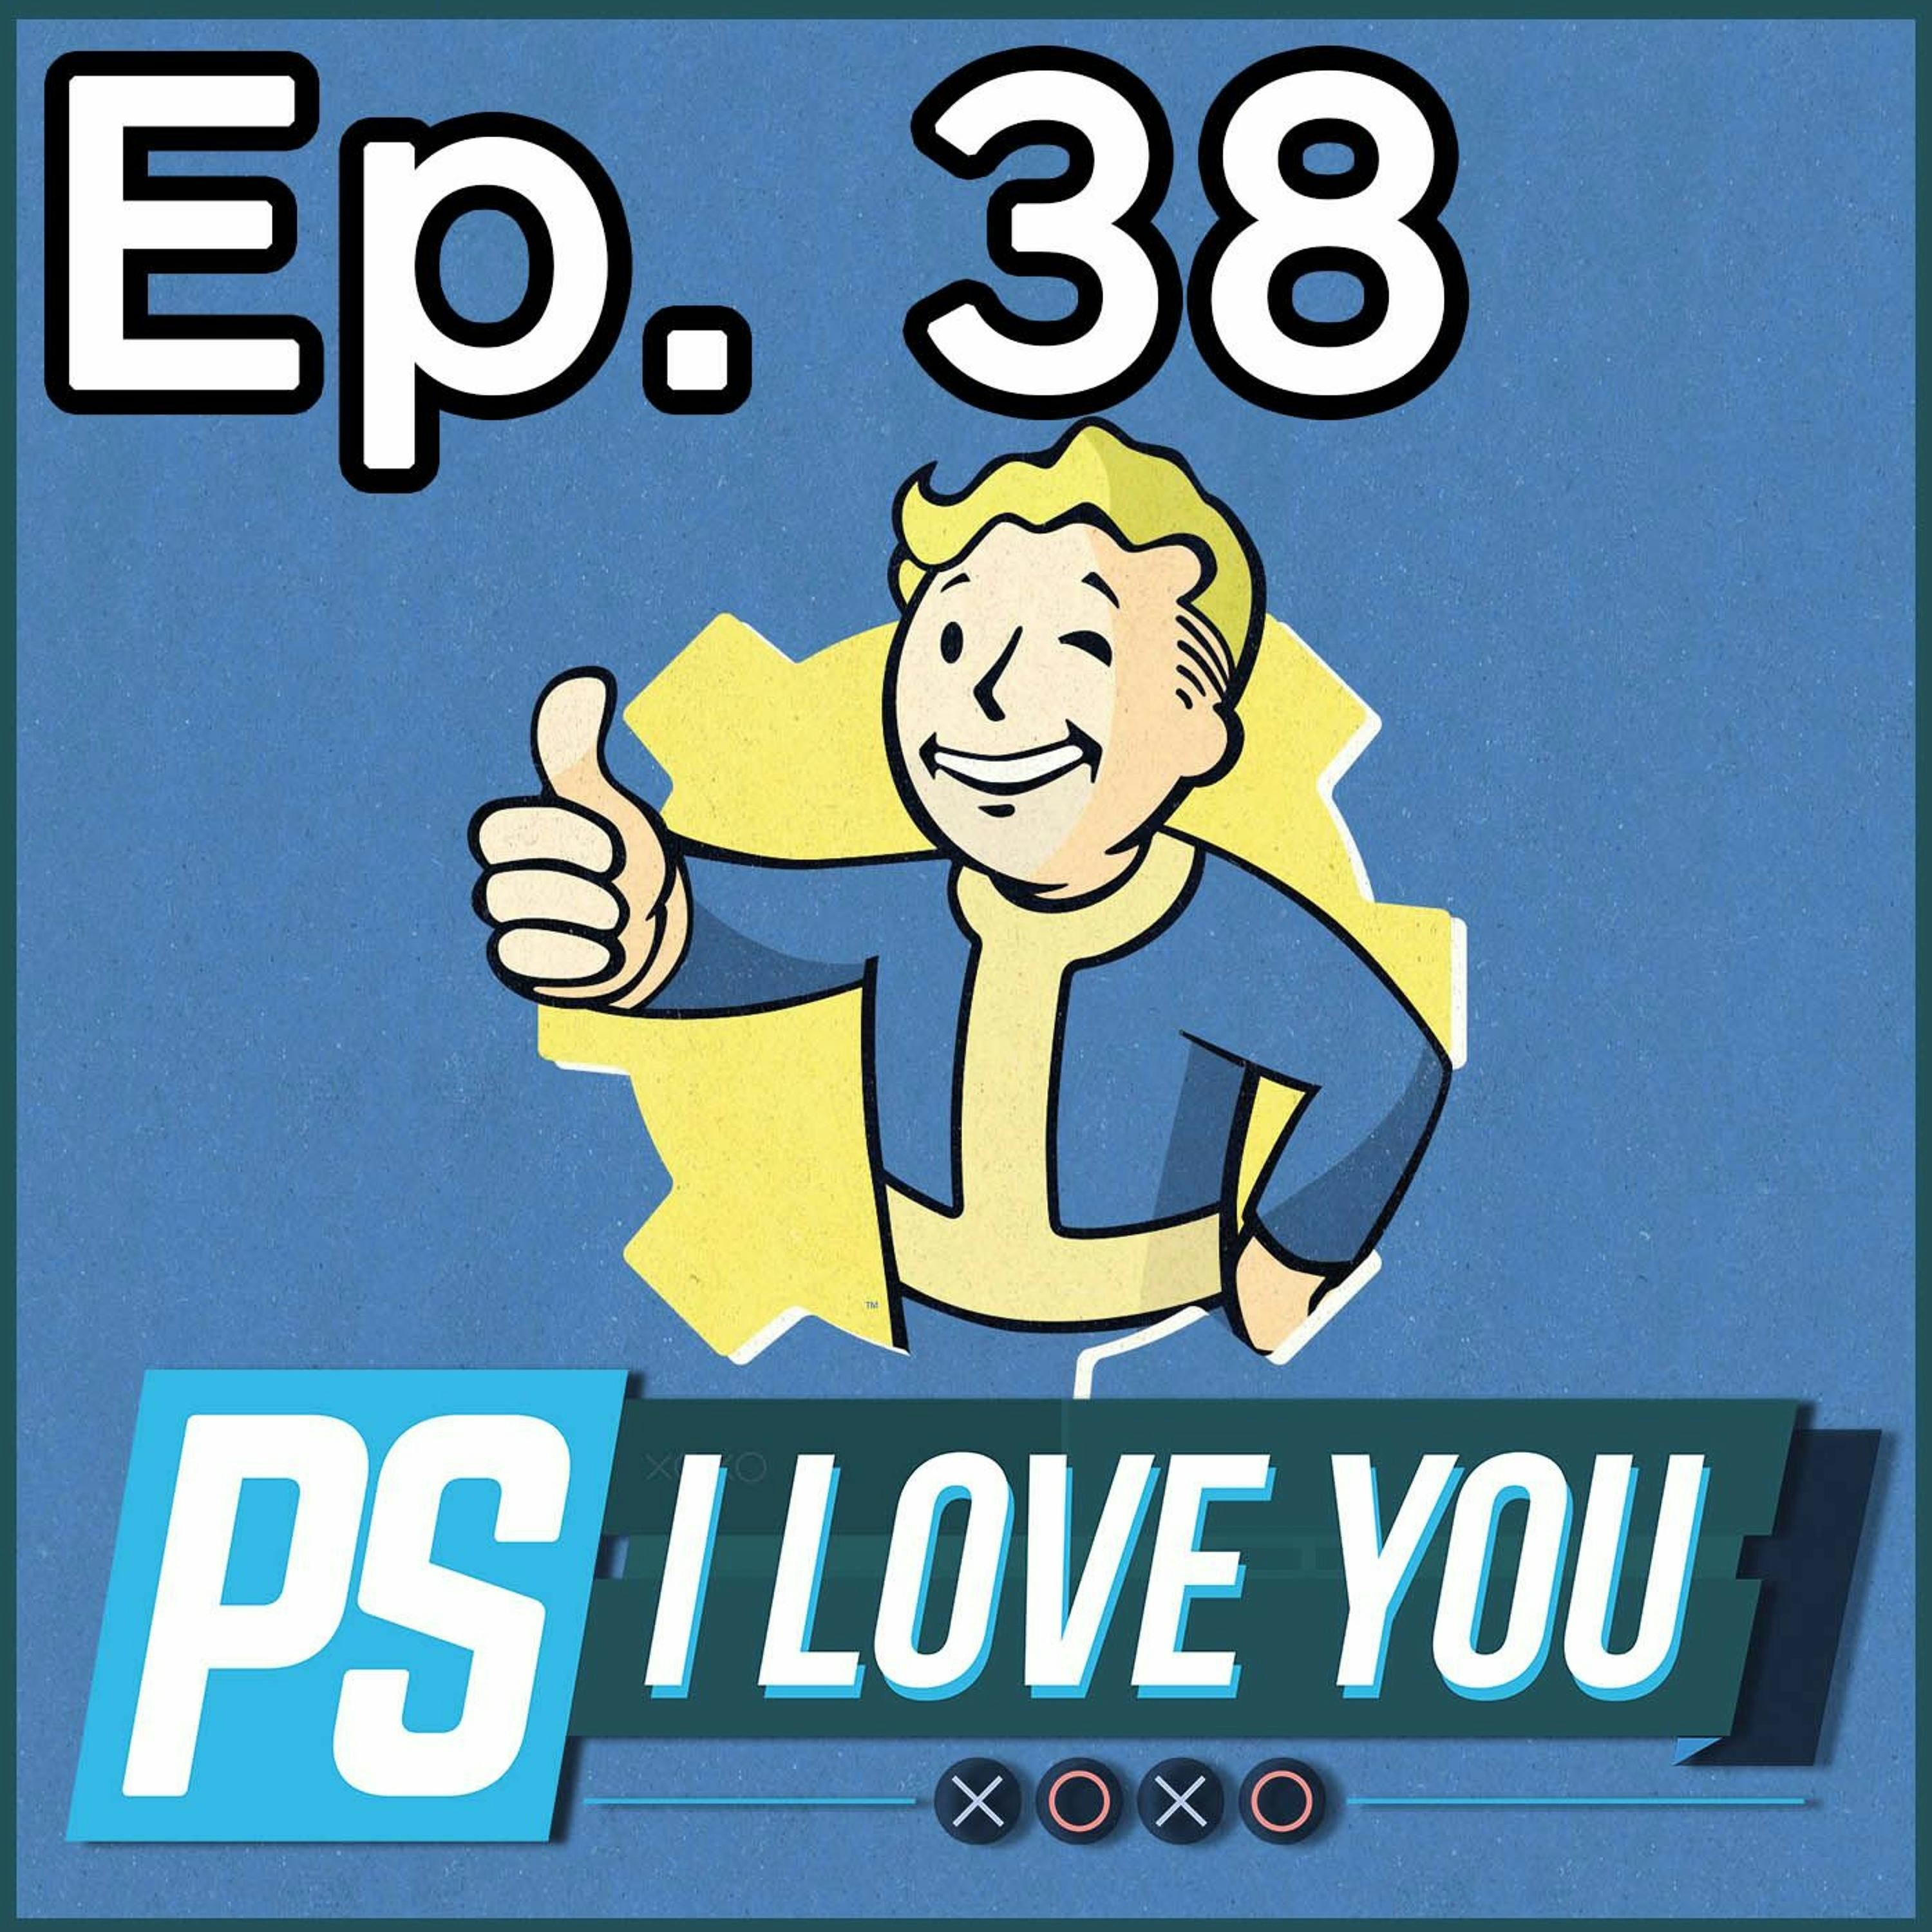 Is Fallout 4 Beloved? - PS I Love You XOXO Ep. 38